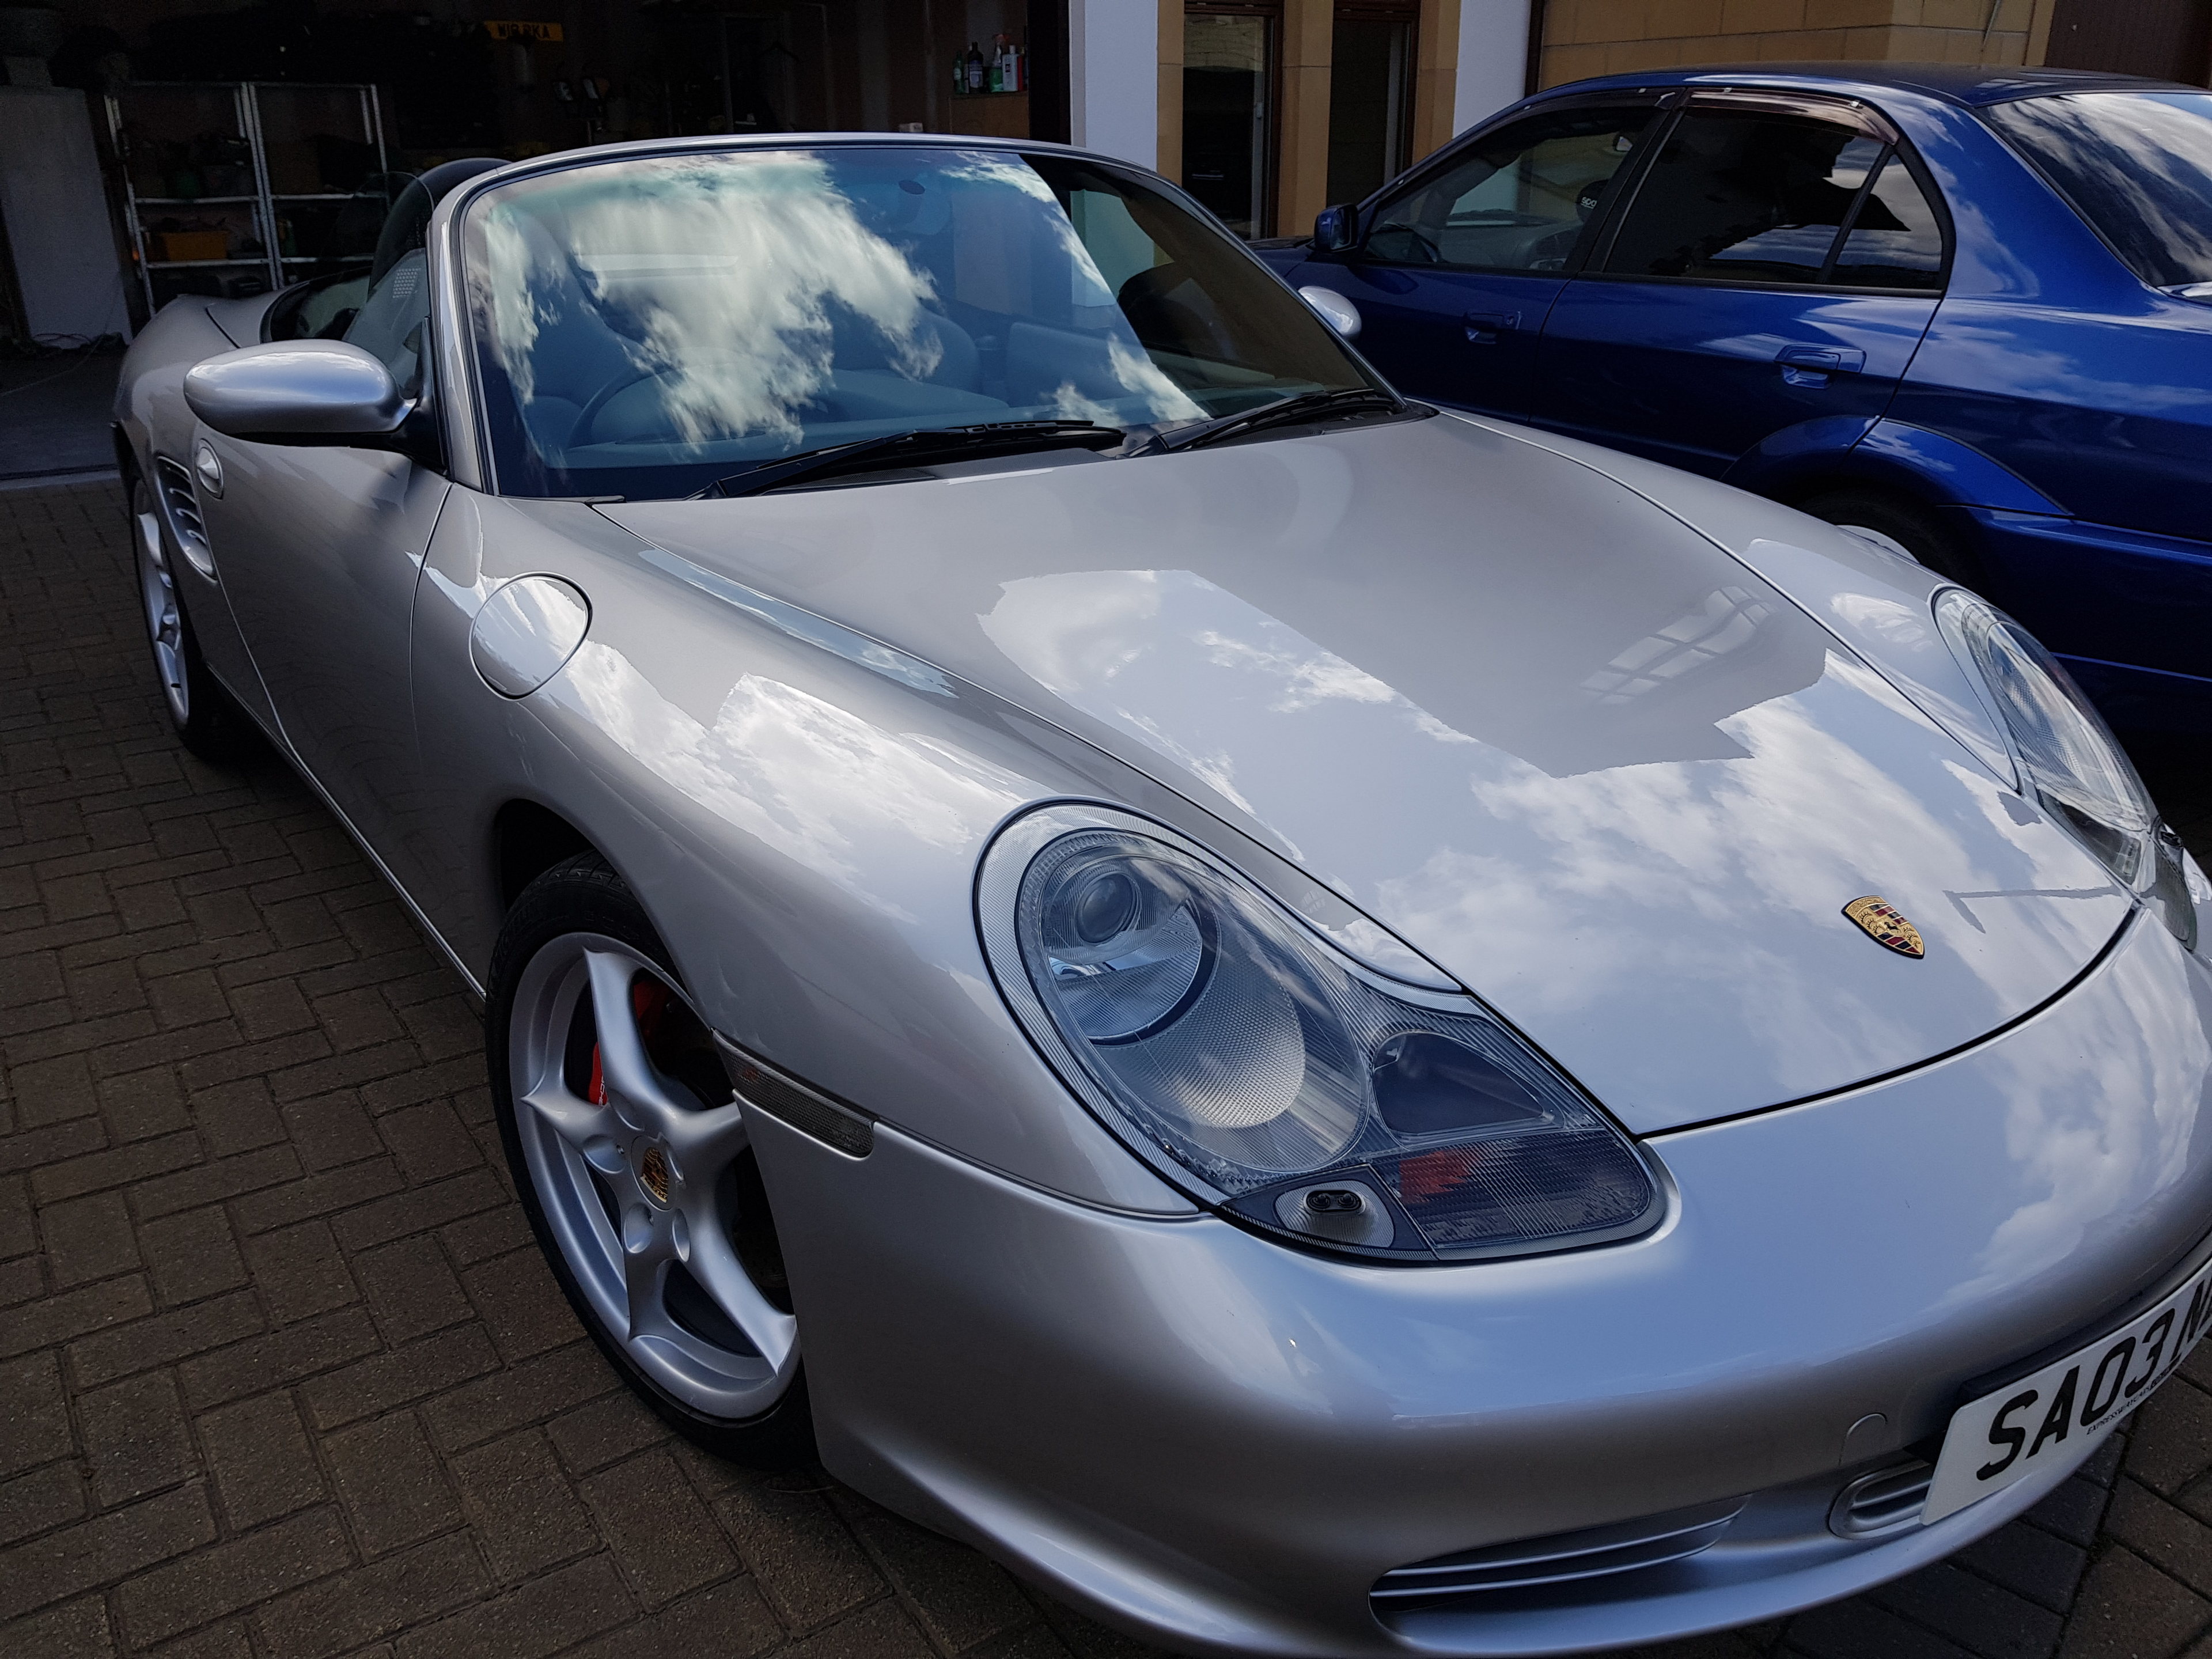 2003 Porsche Boxster S 986 - Page 1 - Readers' Cars - PistonHeads